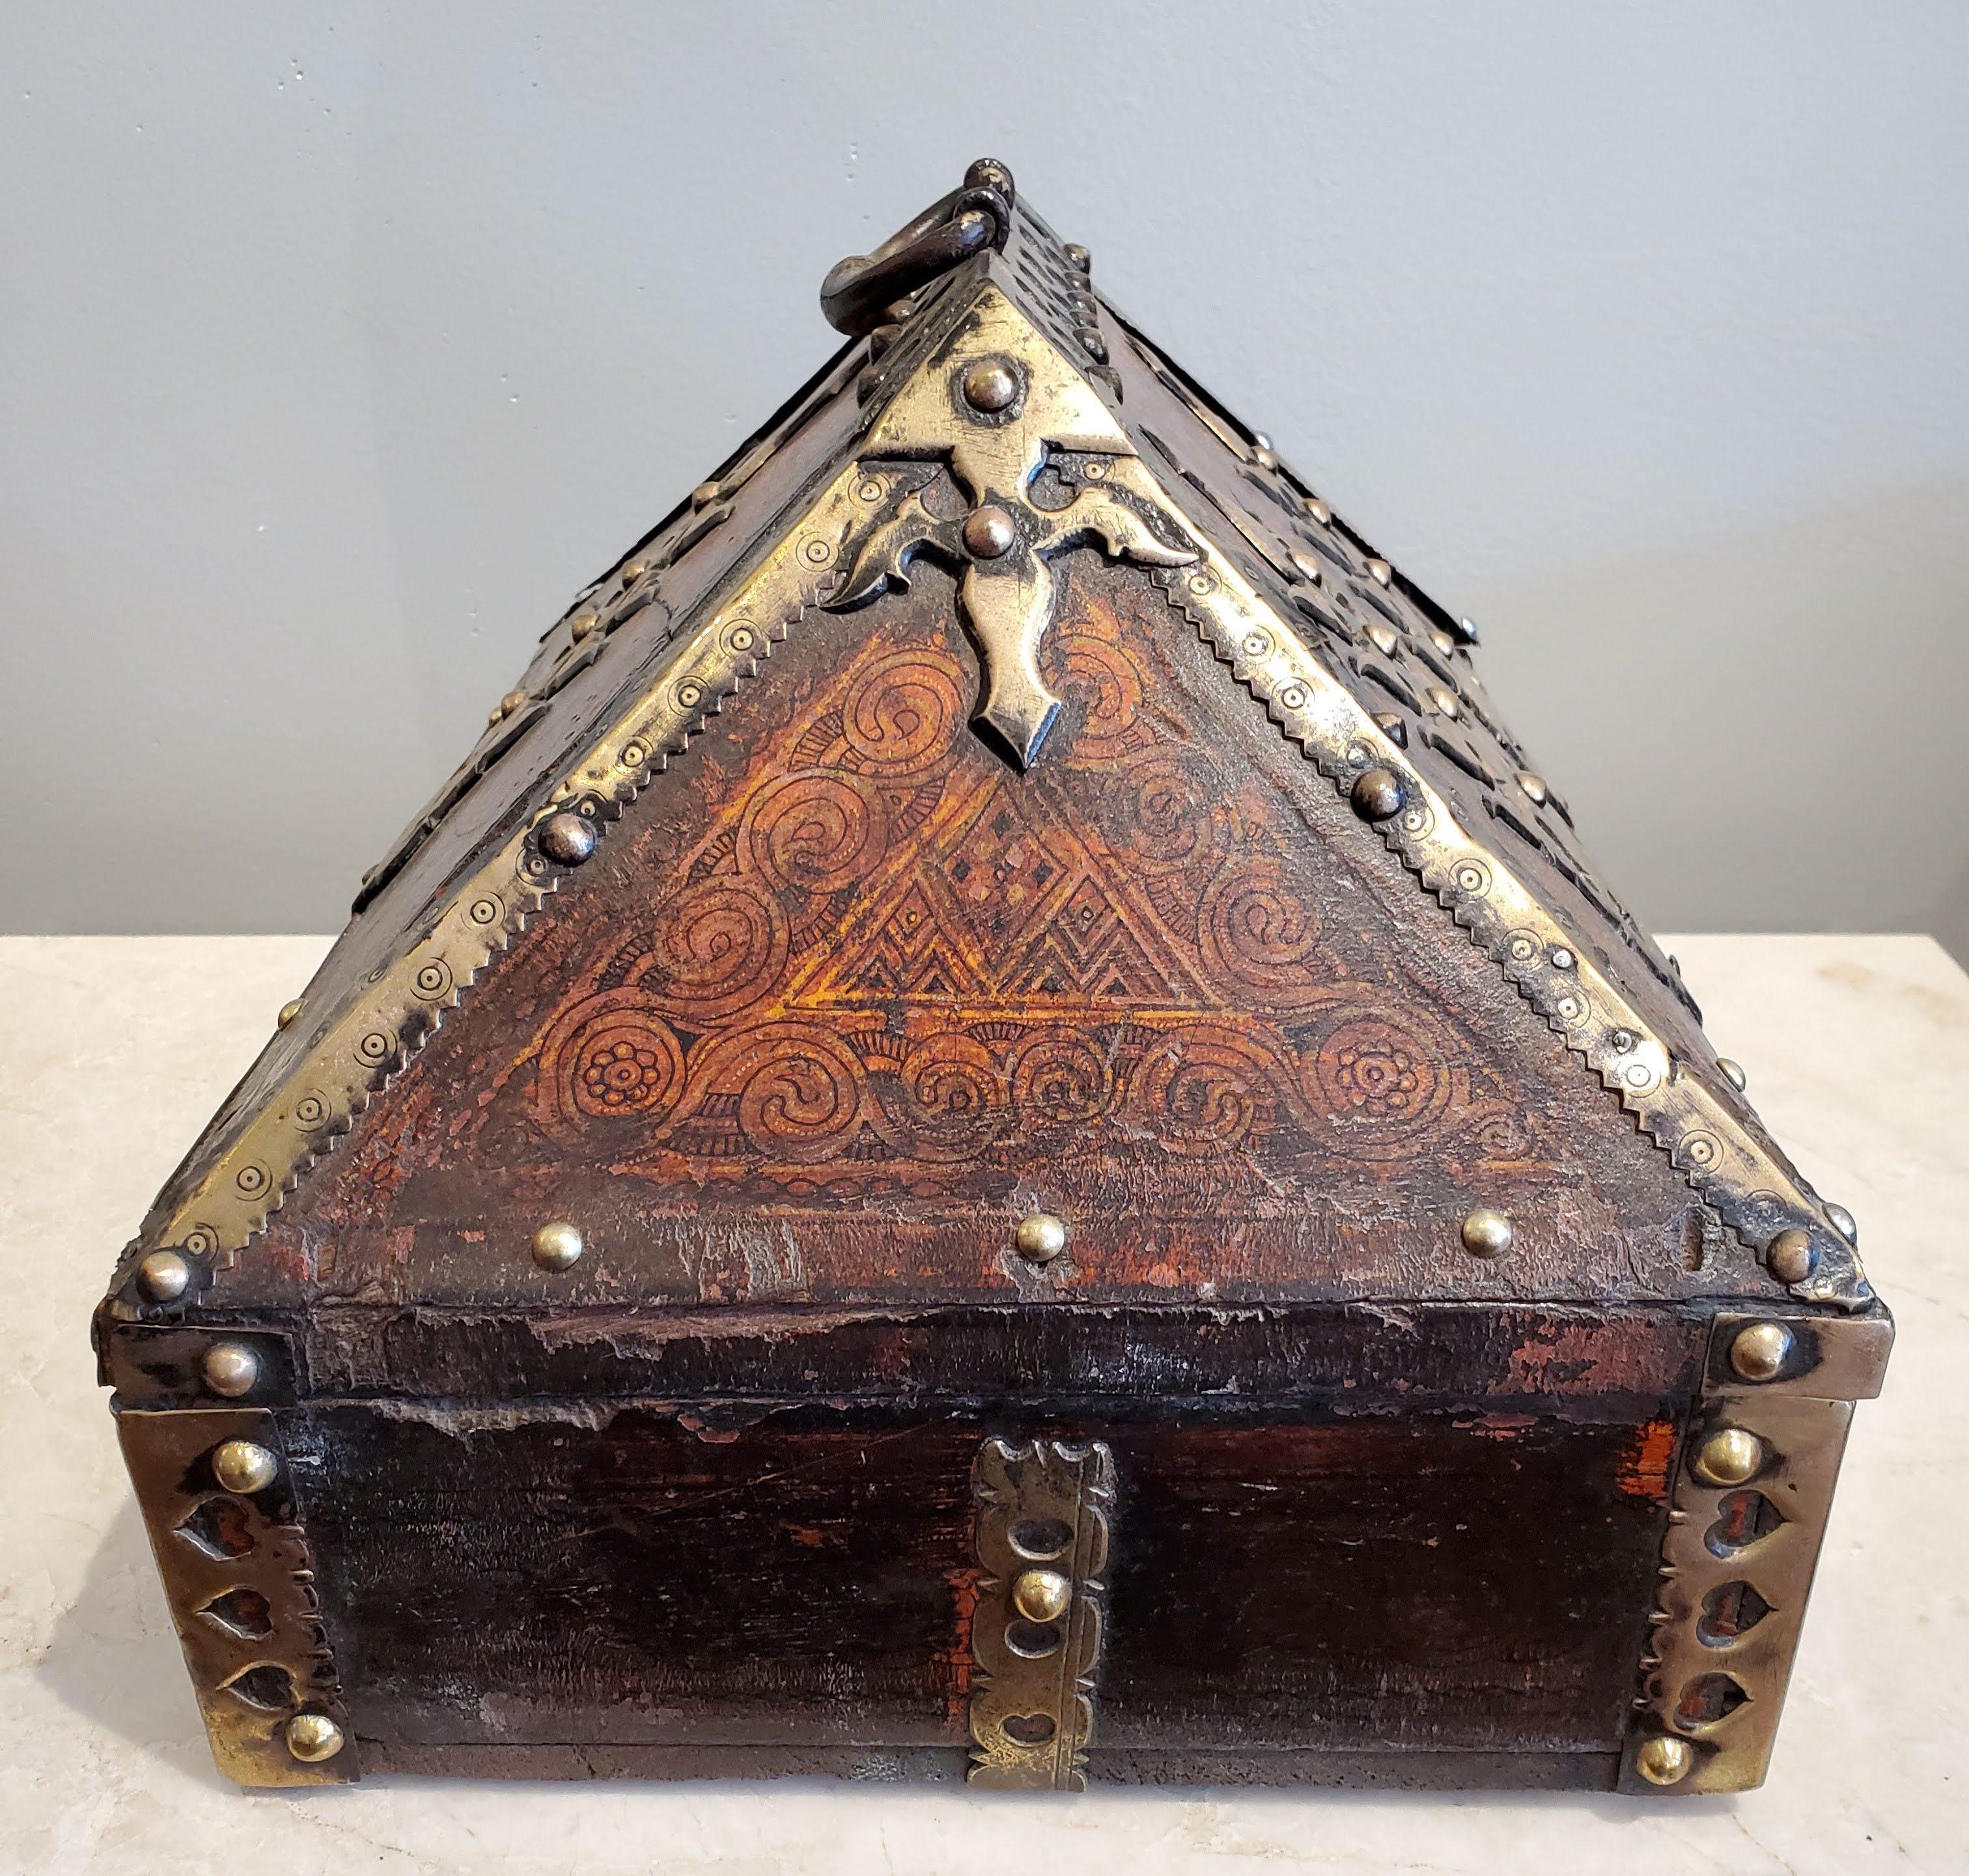 This beautiful late 18th century marriage dowry box is an exquisite example of Indian craftsmanship. Made of teak with a patinated red lacquered surface, intricate pen work and decorative brass. This piece will make a wonderful addition to your home